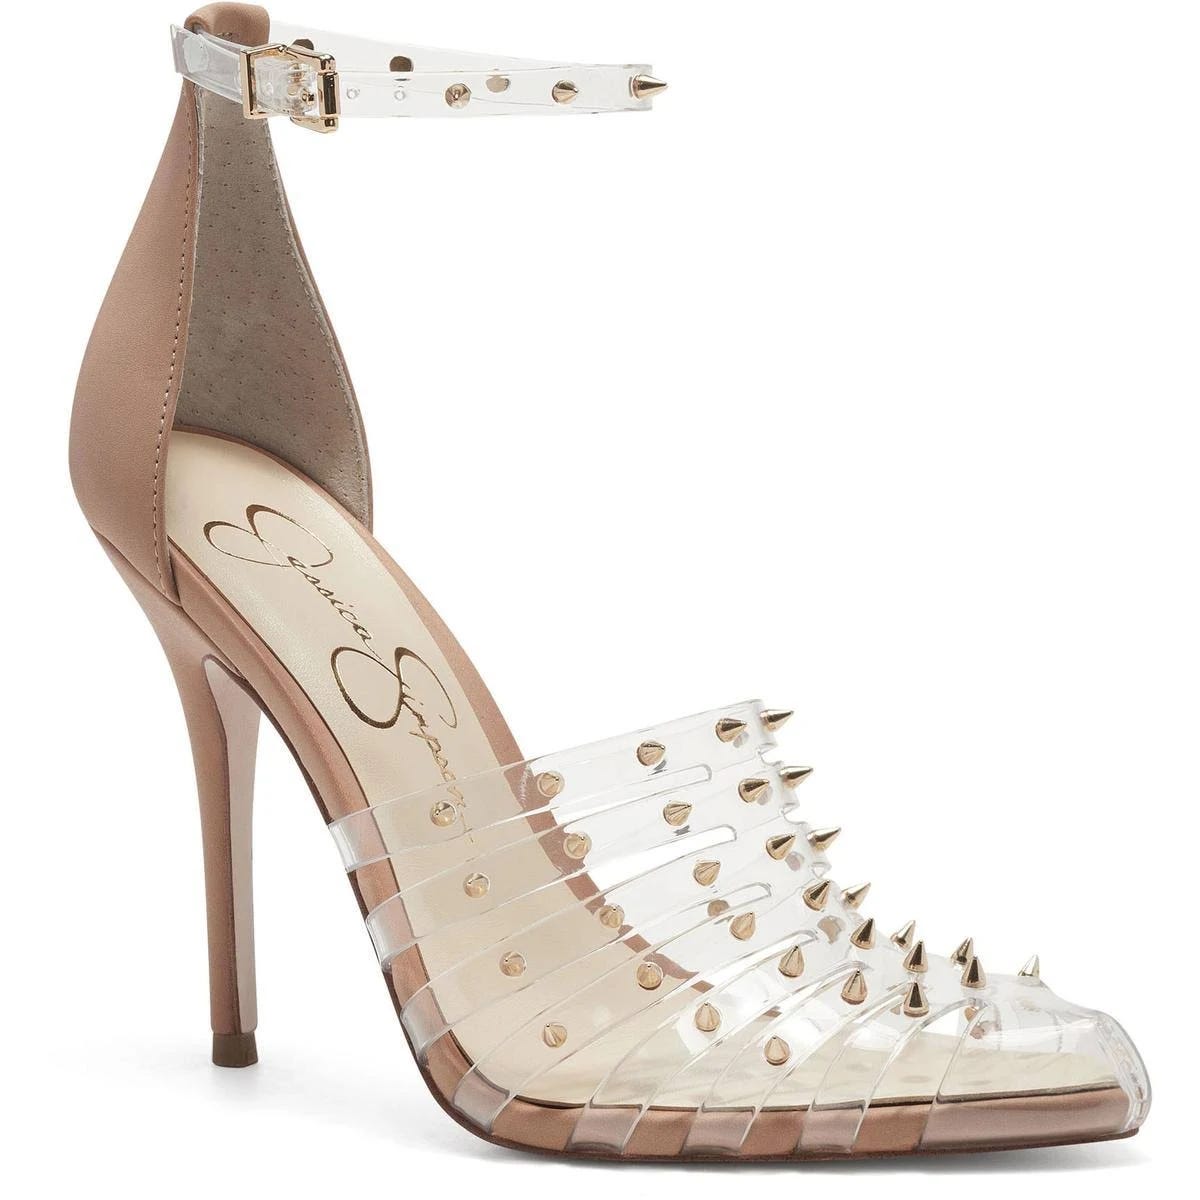 Bold Studded Clear Heels by Jessica Simpson | Image